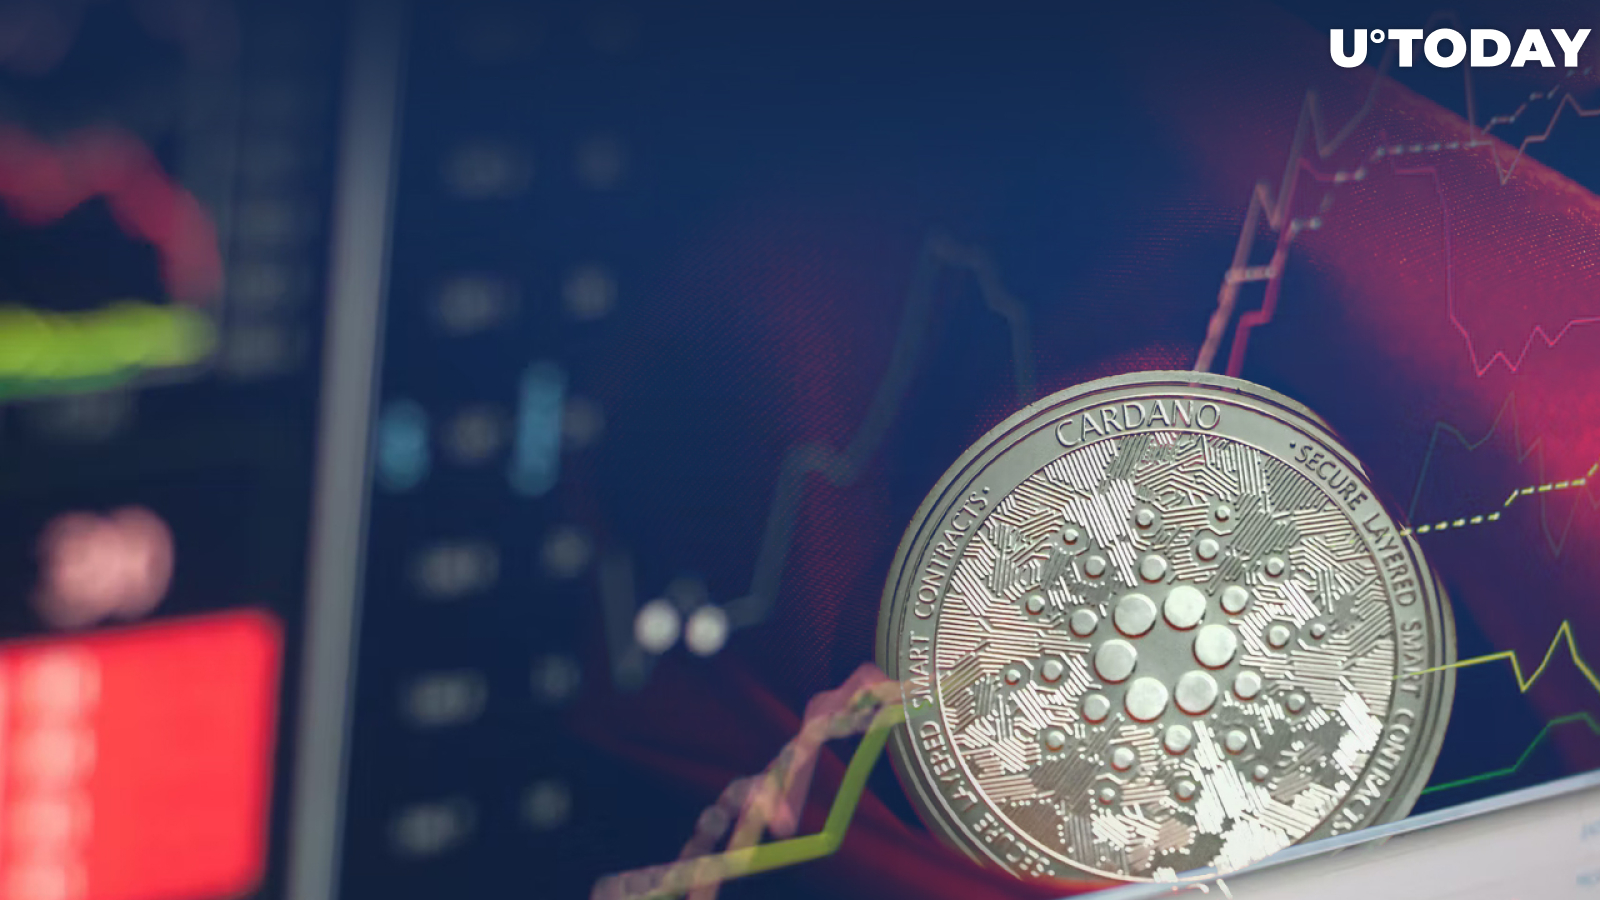 Cardano's On-Chain Data Shows Network Growth, With Average Monthly Transactions up 8%